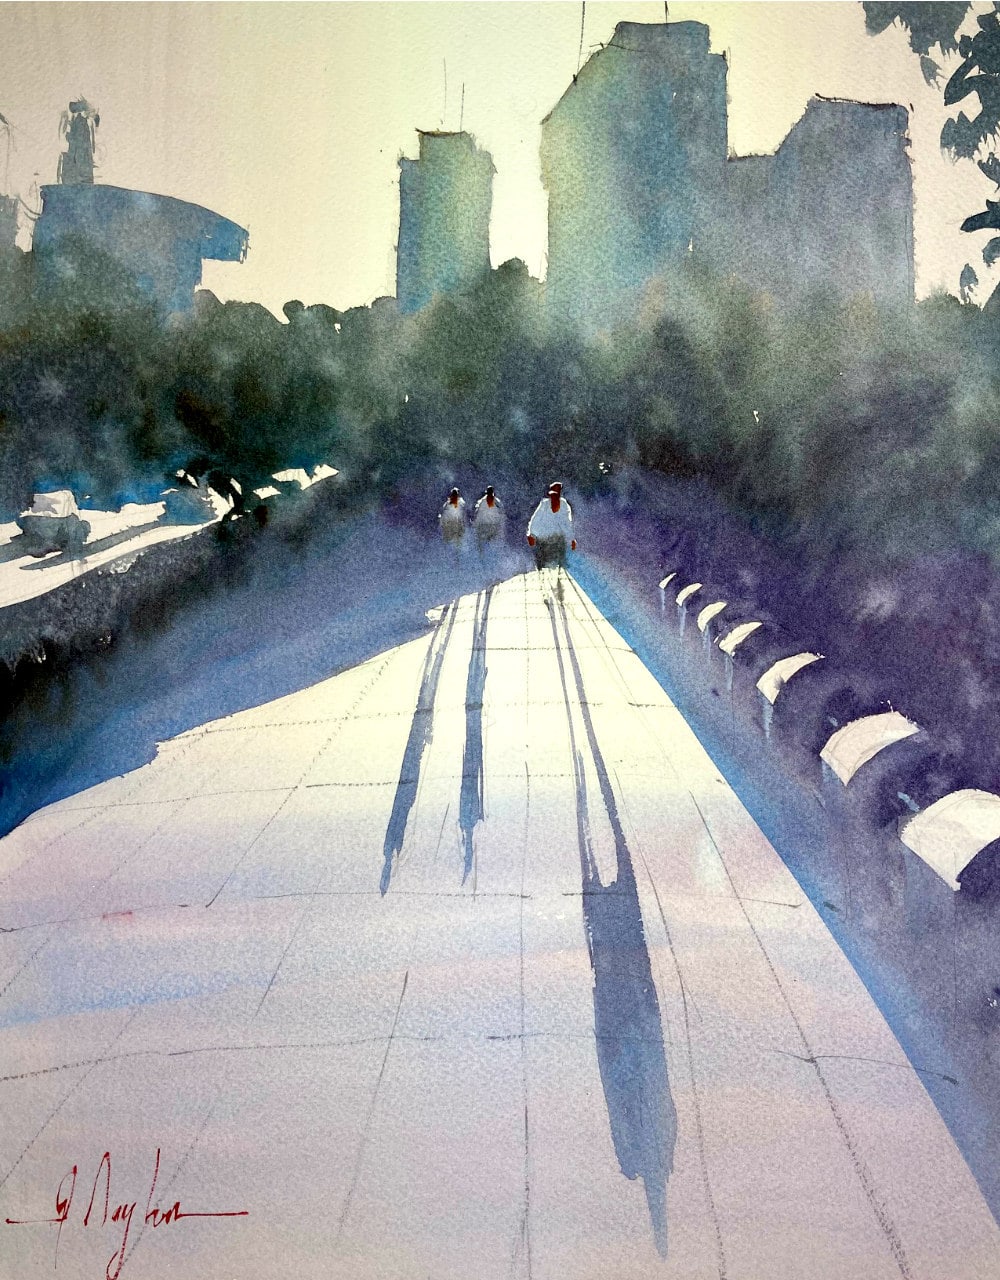 Watercolor painting of a street by Oita castle